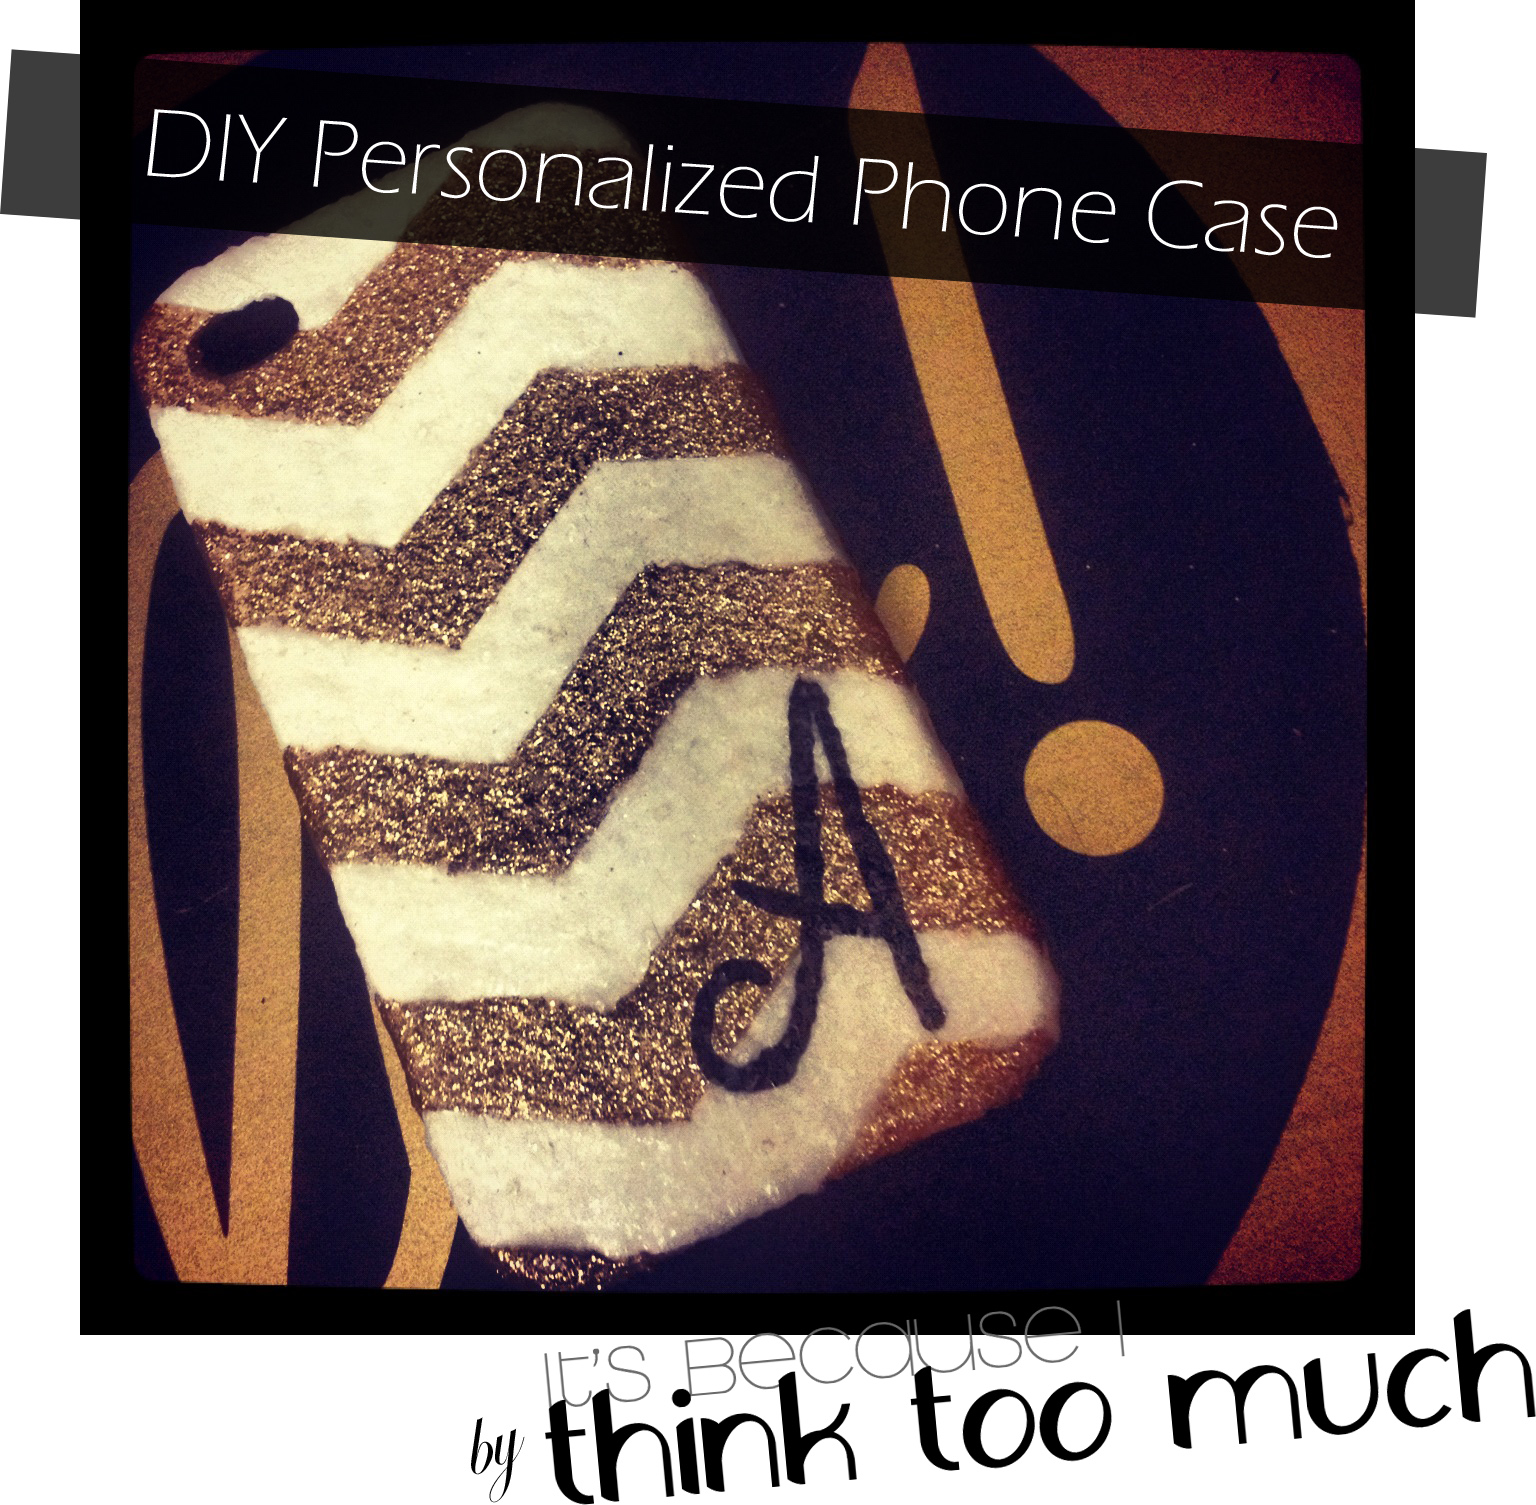 diy personalized phone case by adiel on ibittm